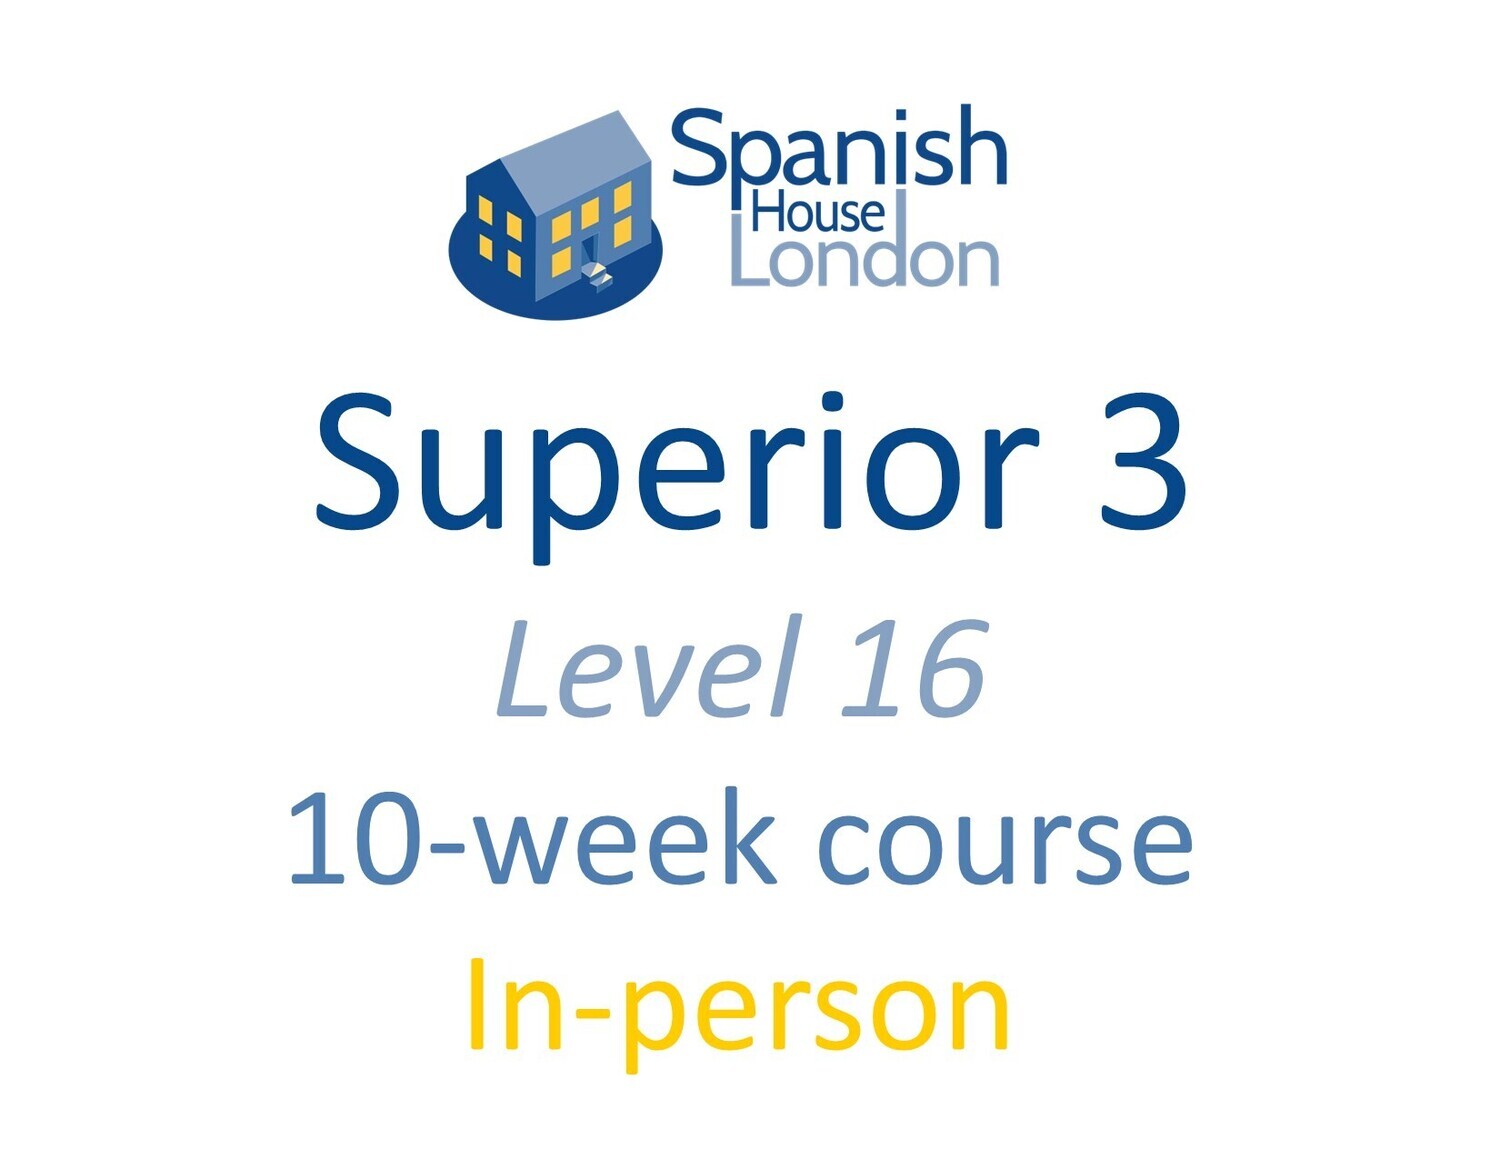 Superior 3 Course starting on 20th January at 6pm in Clapham North